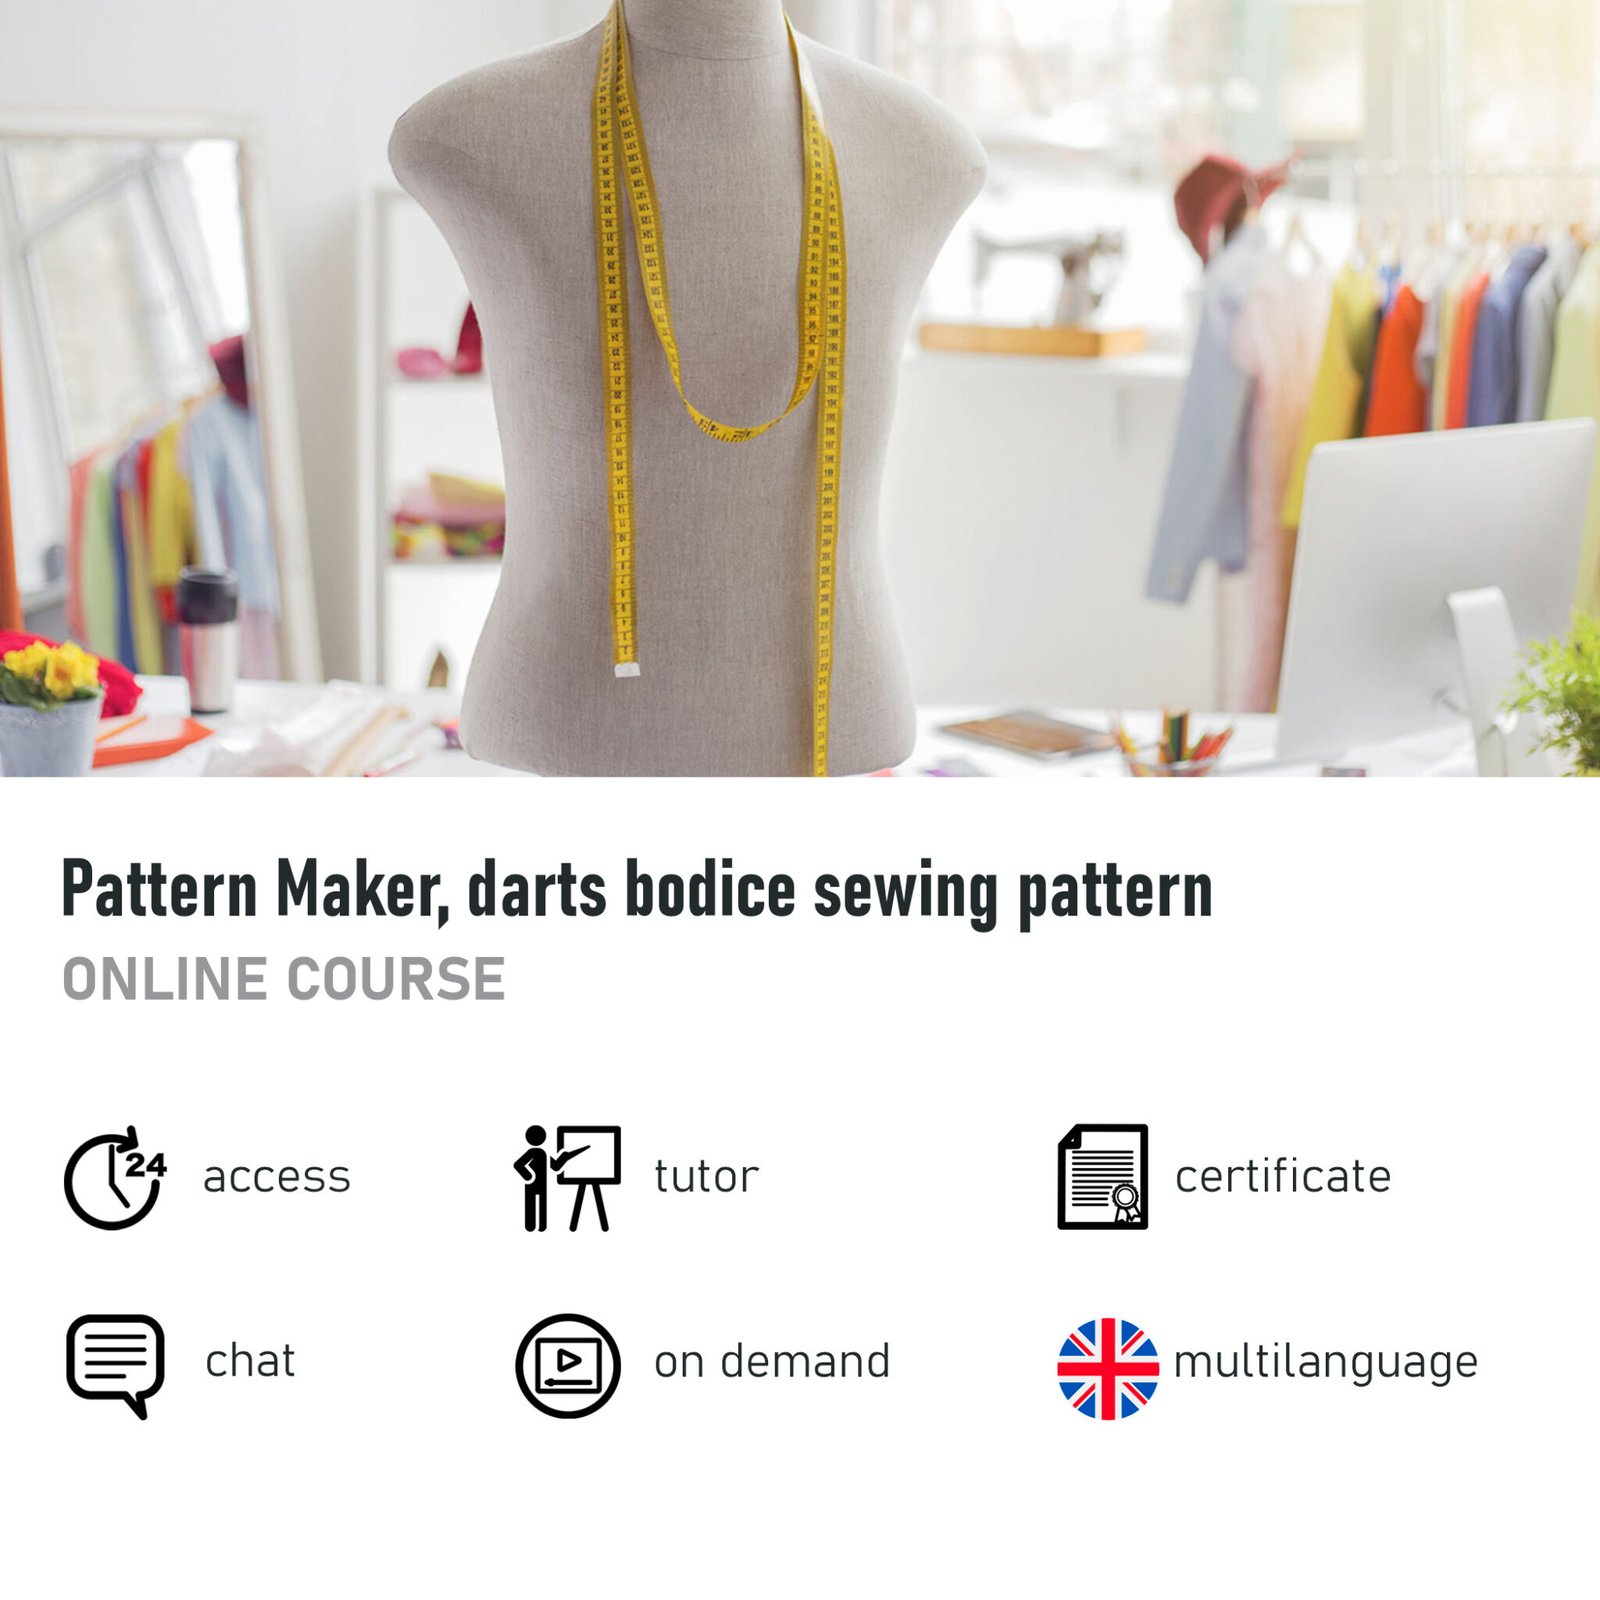 online pattern maker courses, pattern maker, pattern maker courses, pattern maker courses online, fashion academy, fashion courses,